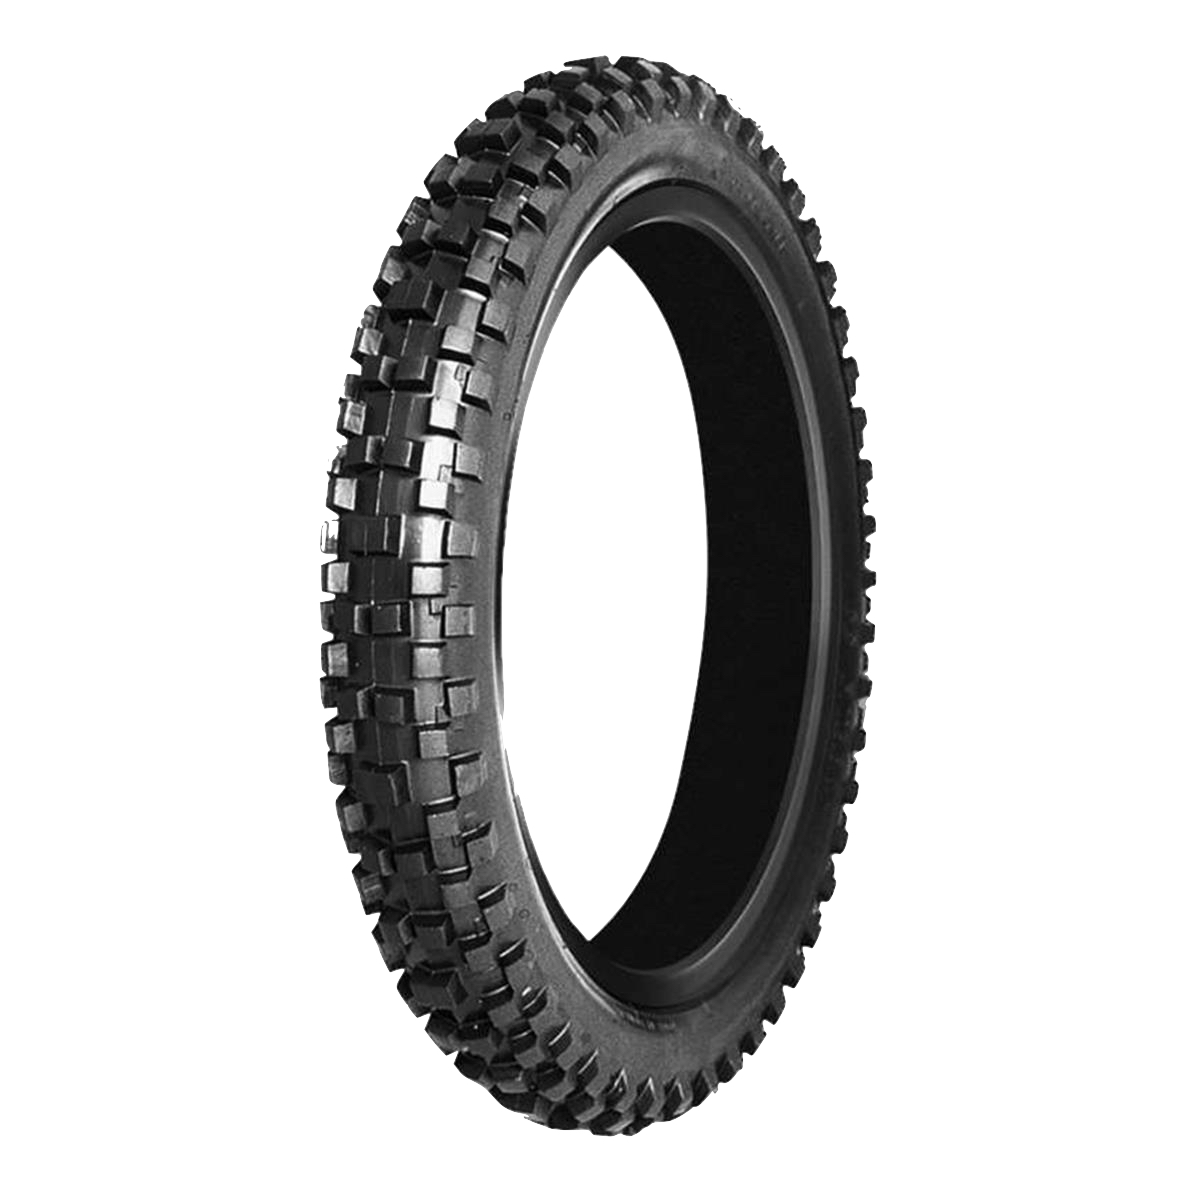 FRONT TIRE 2.50-12